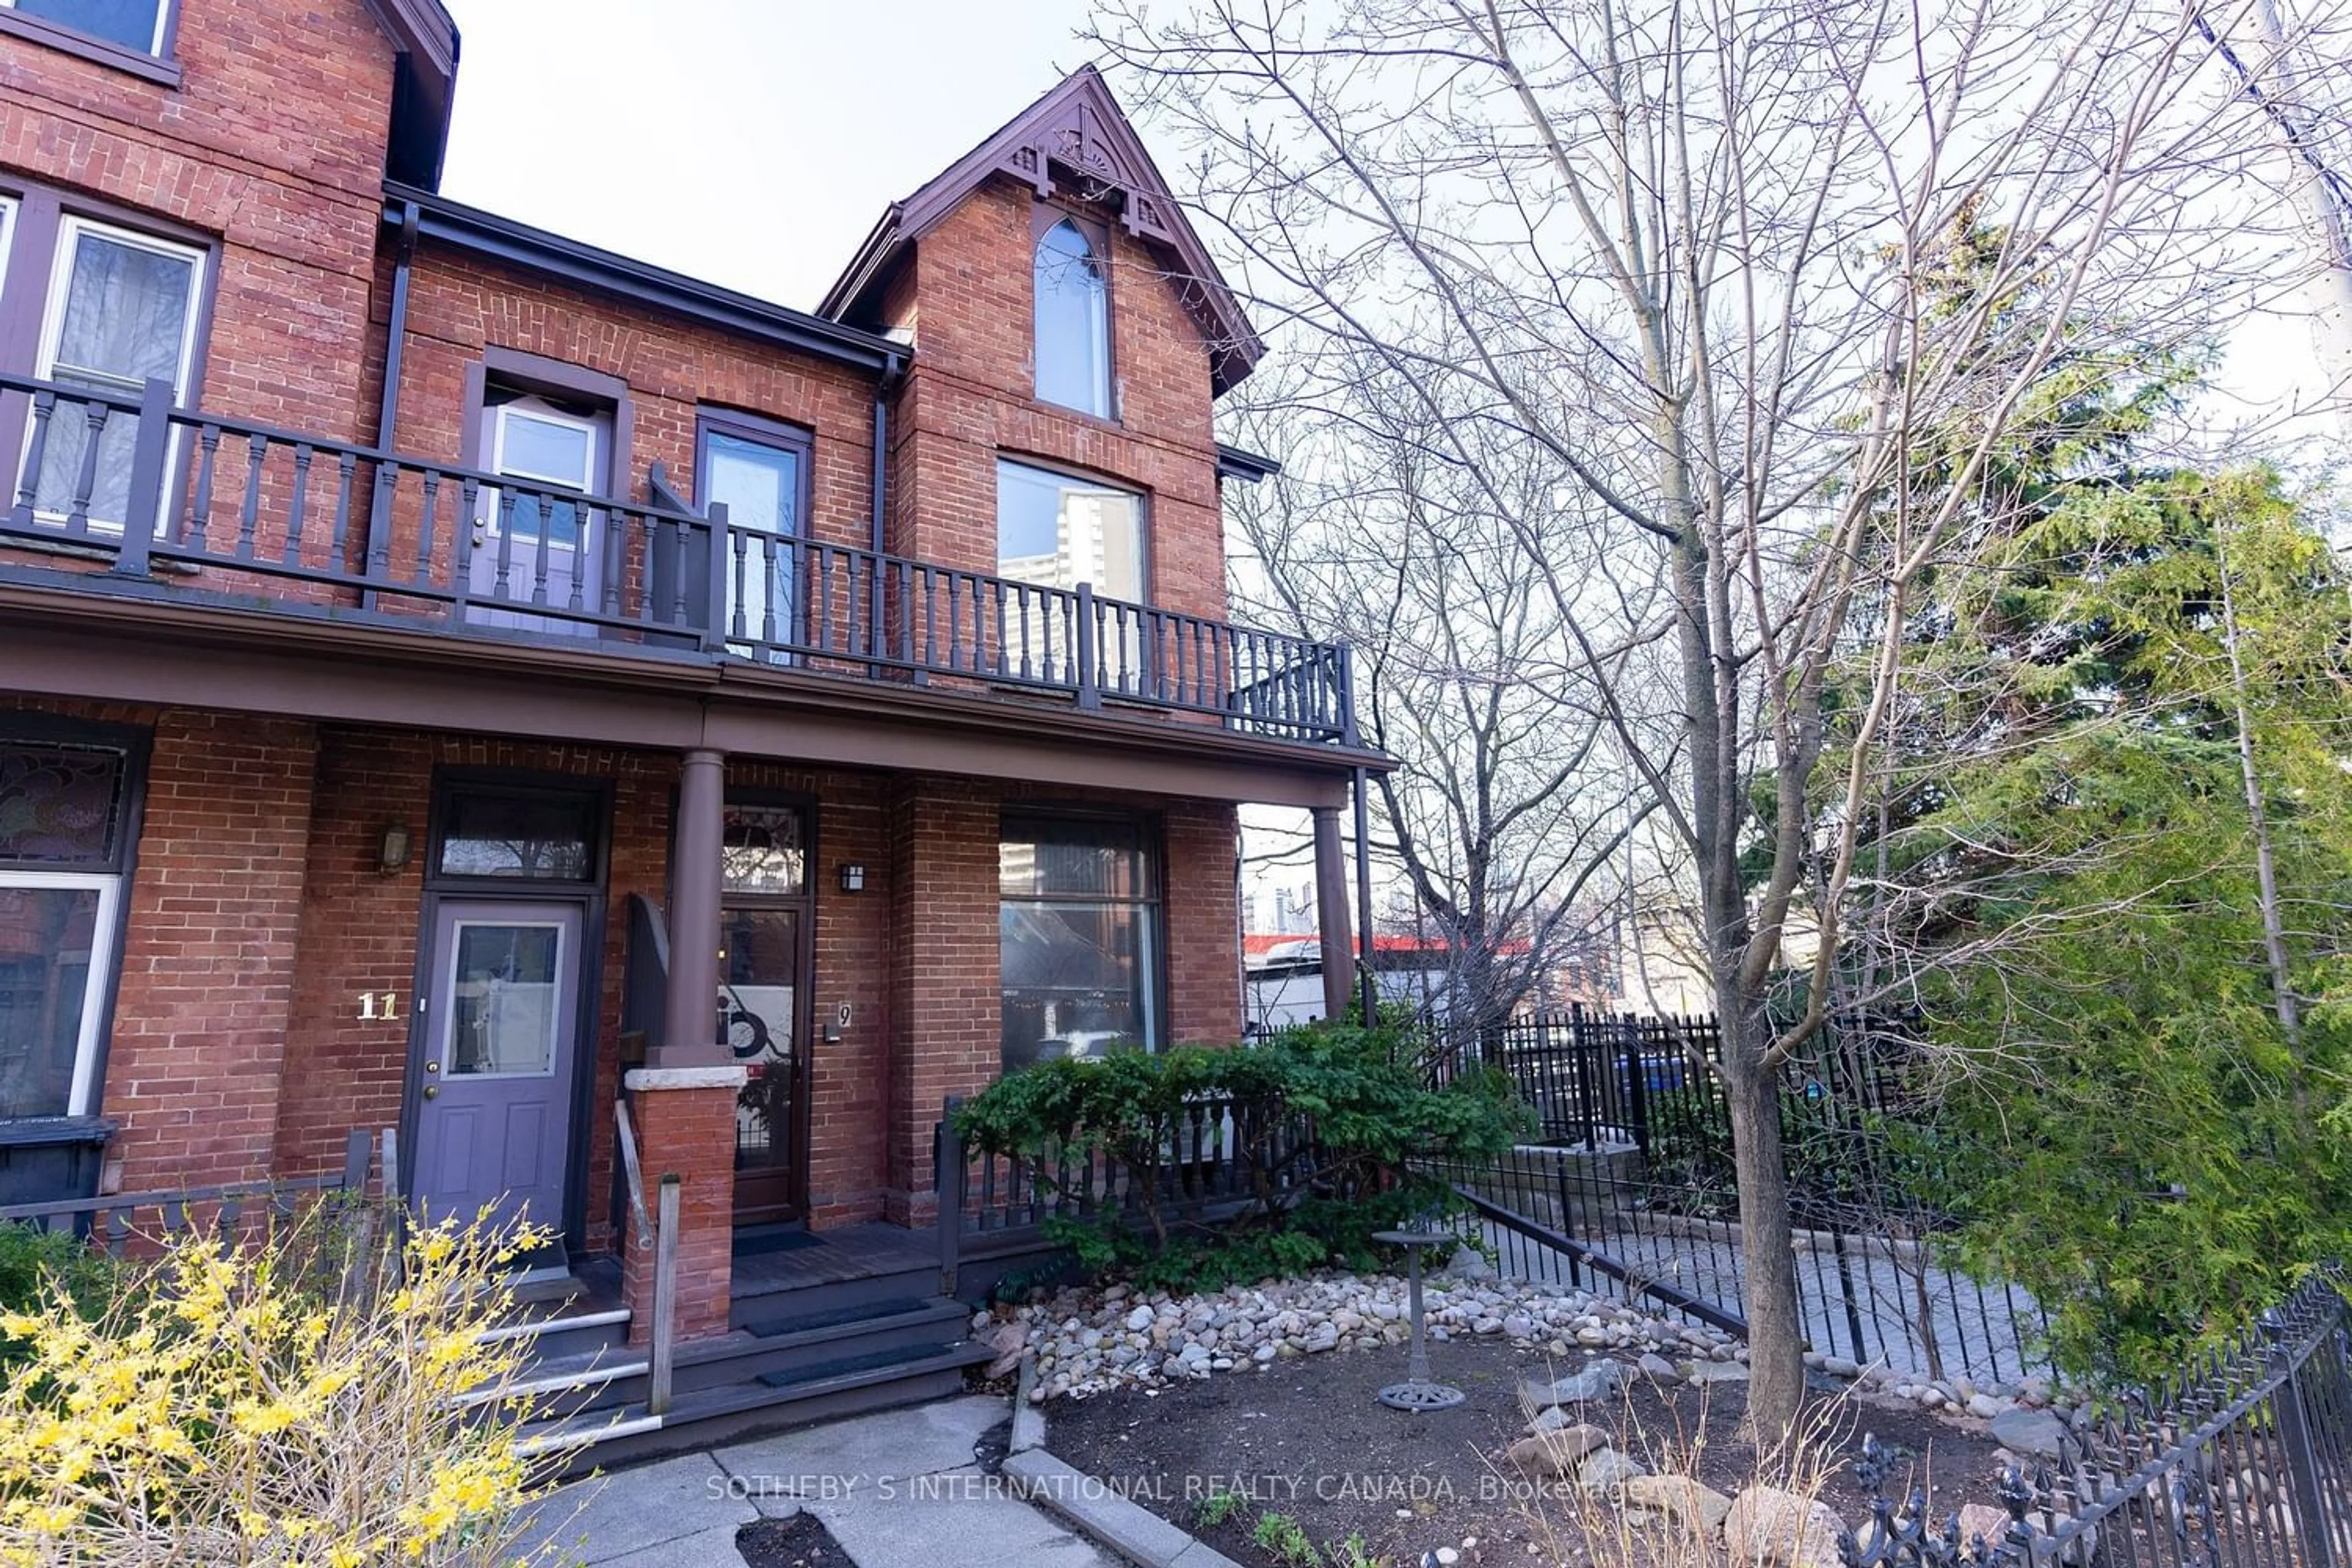 A pic from exterior of the house or condo for 9 Amelia St, Toronto Ontario M4X 1E2